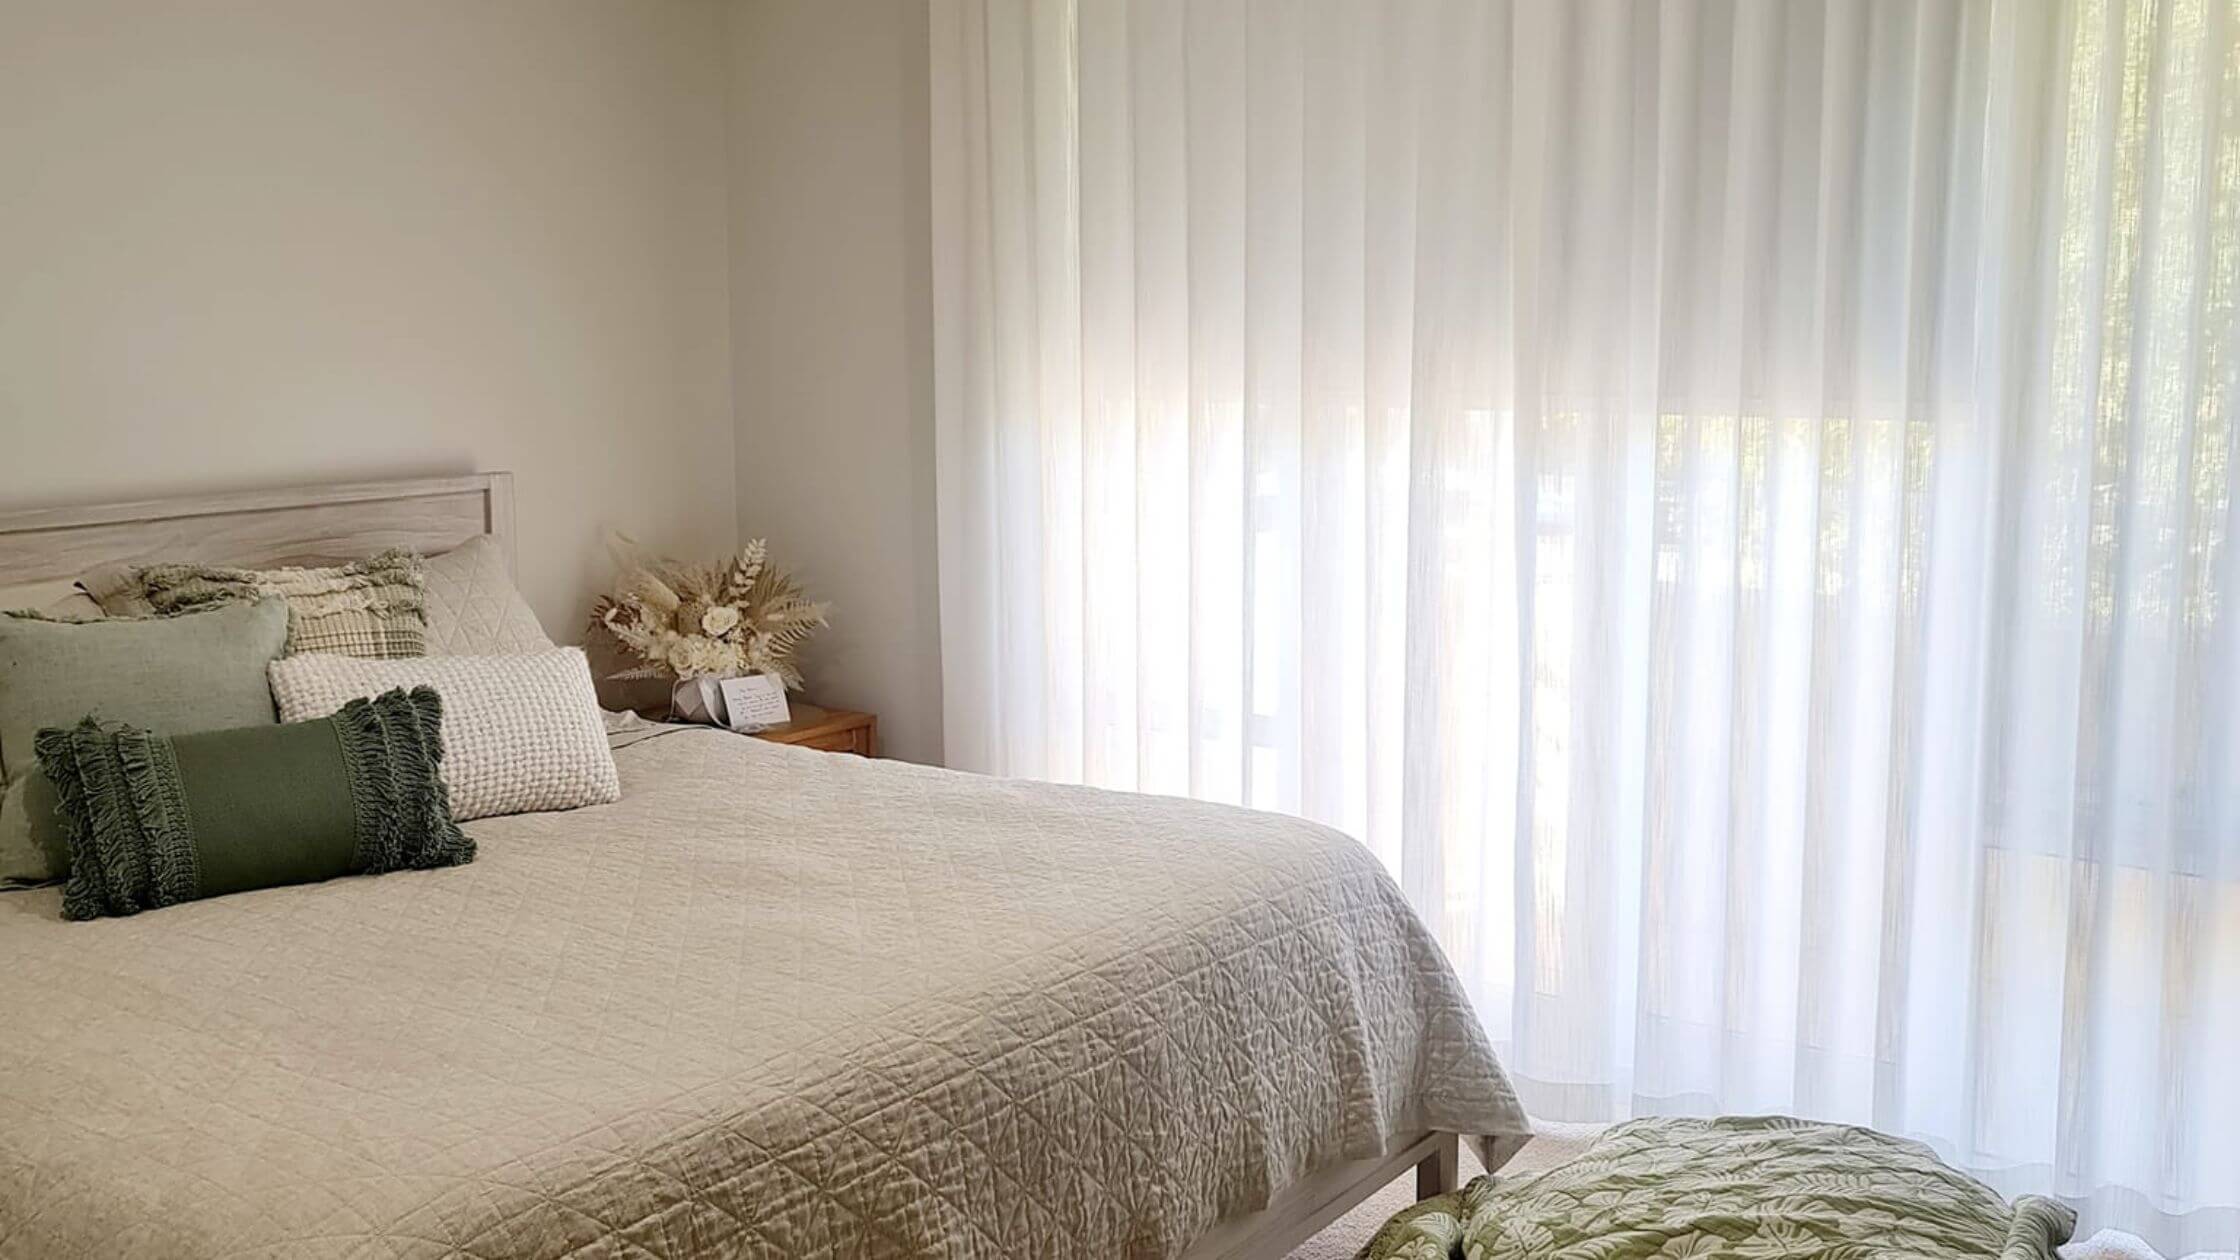 How To Simplify Cleaning The Curtains And Sheers?